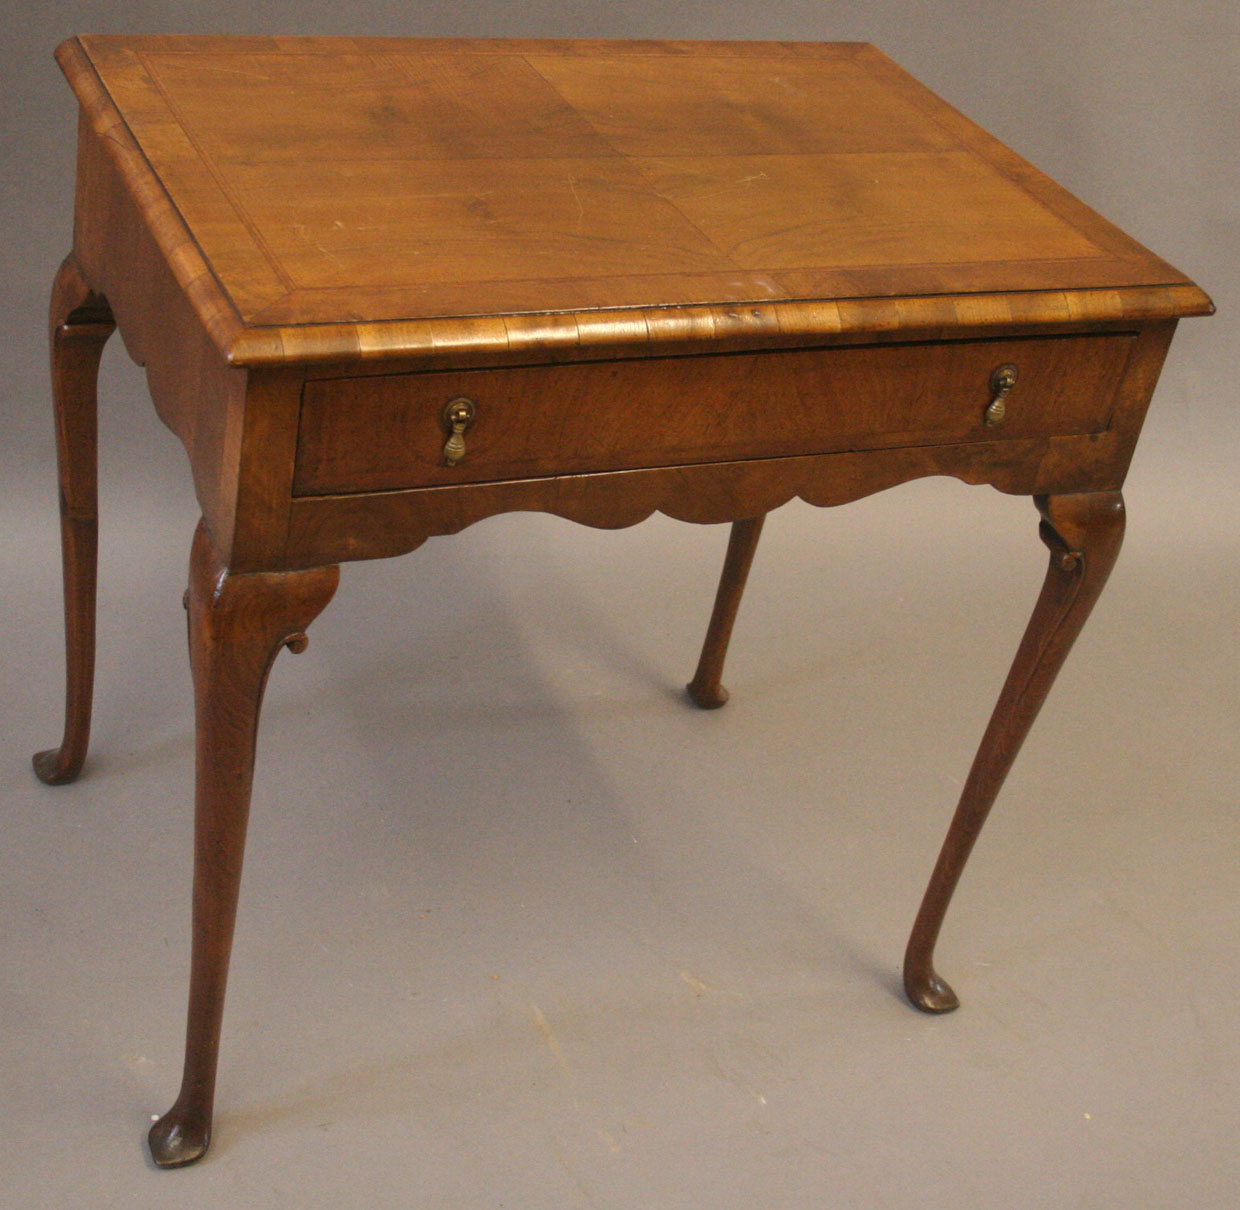 A good quality Charles Tozer early Georgian style walnut side table, the quarter veneered top with